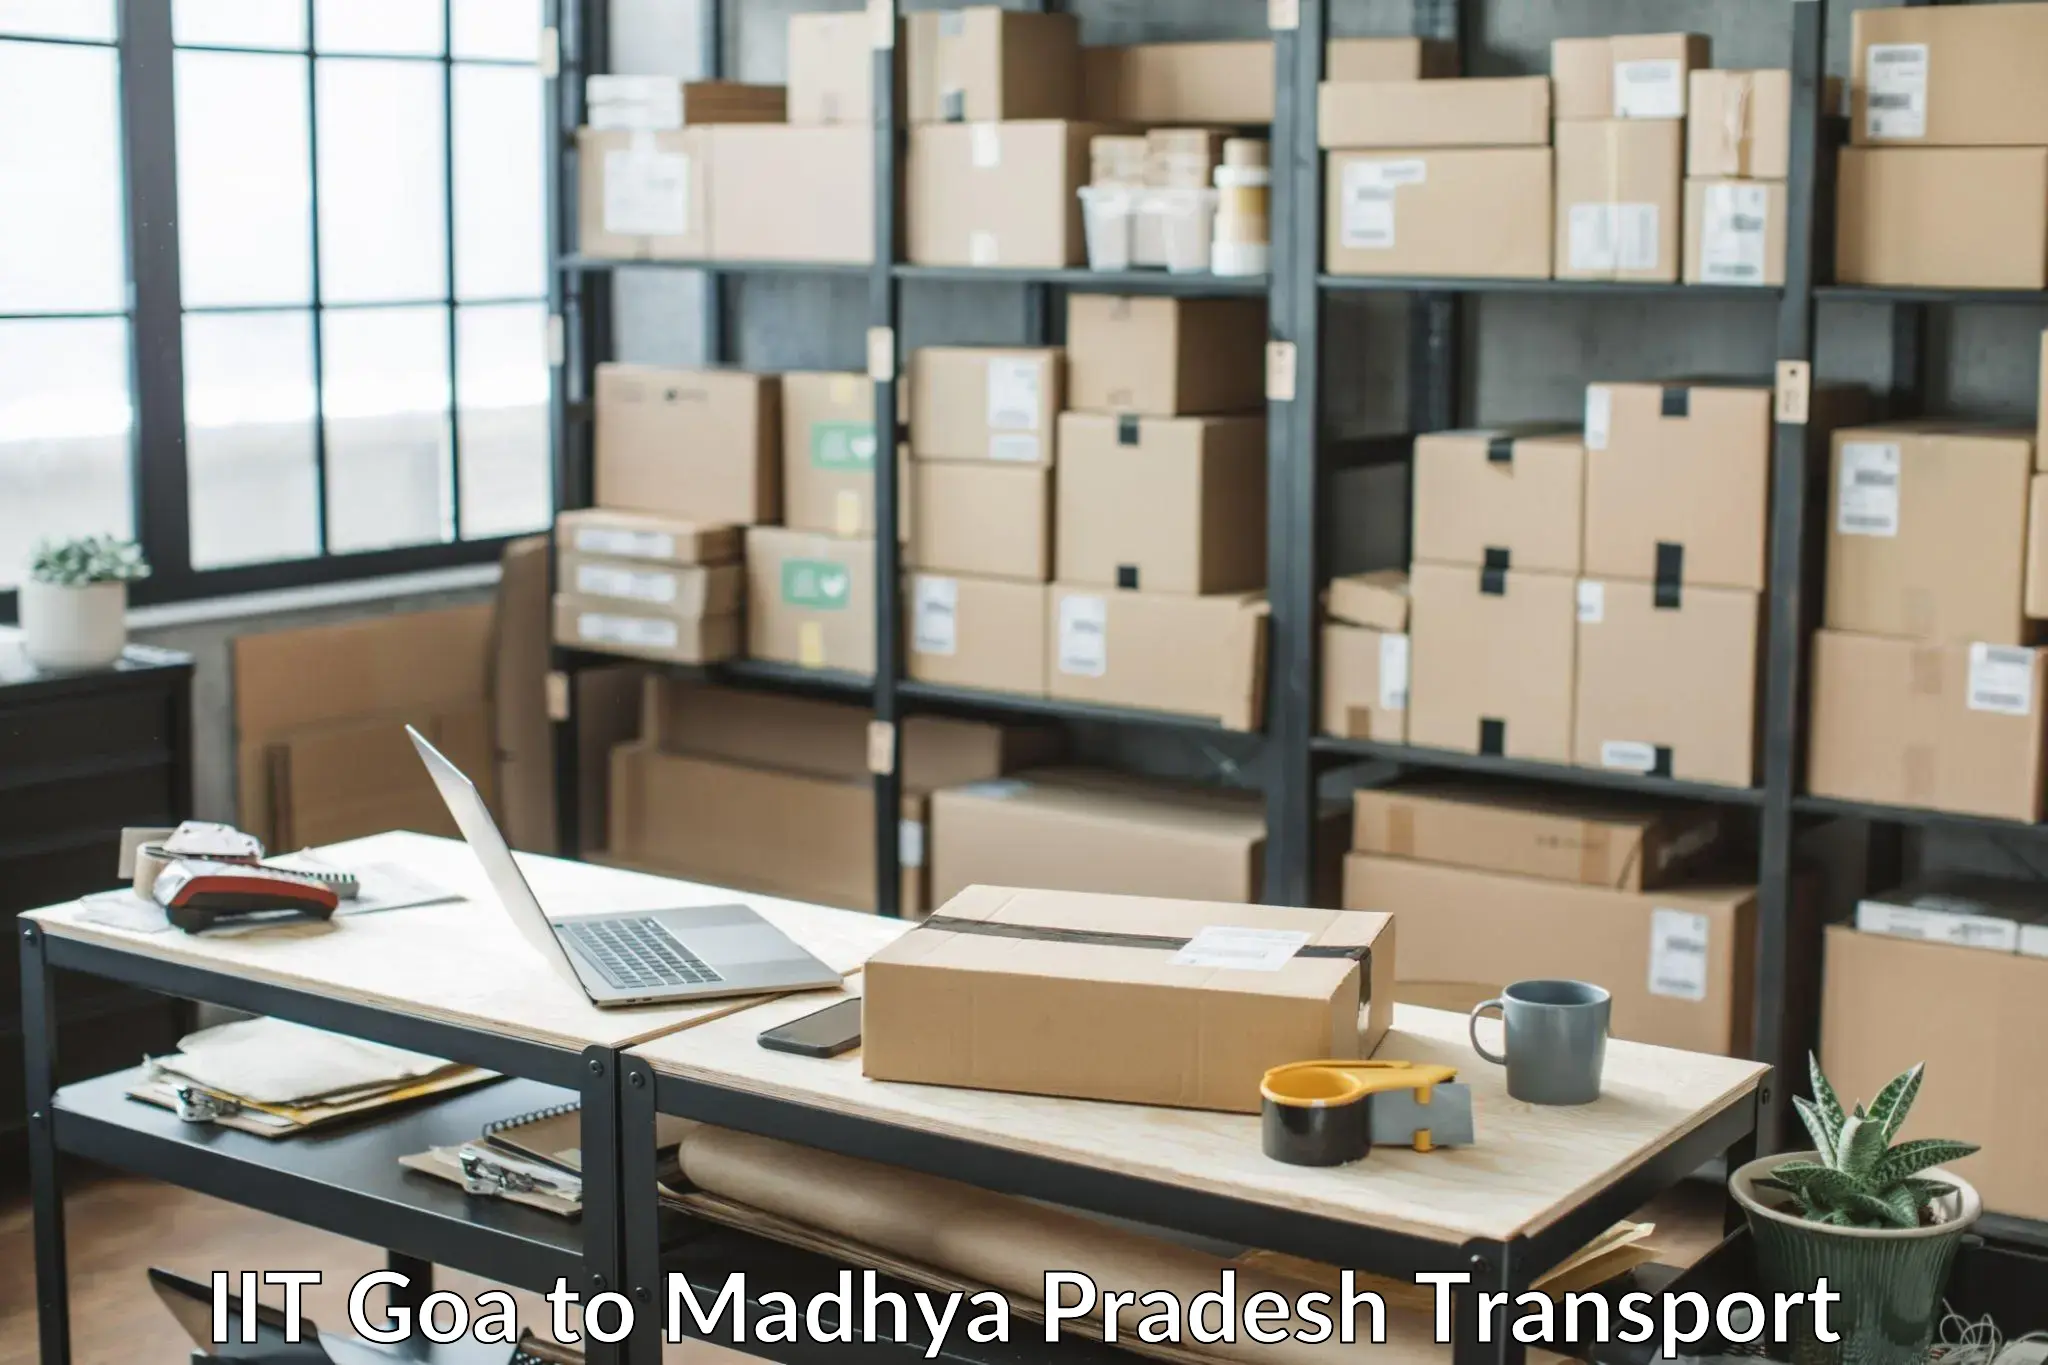 Package delivery services IIT Goa to Raipur Karchuliyan